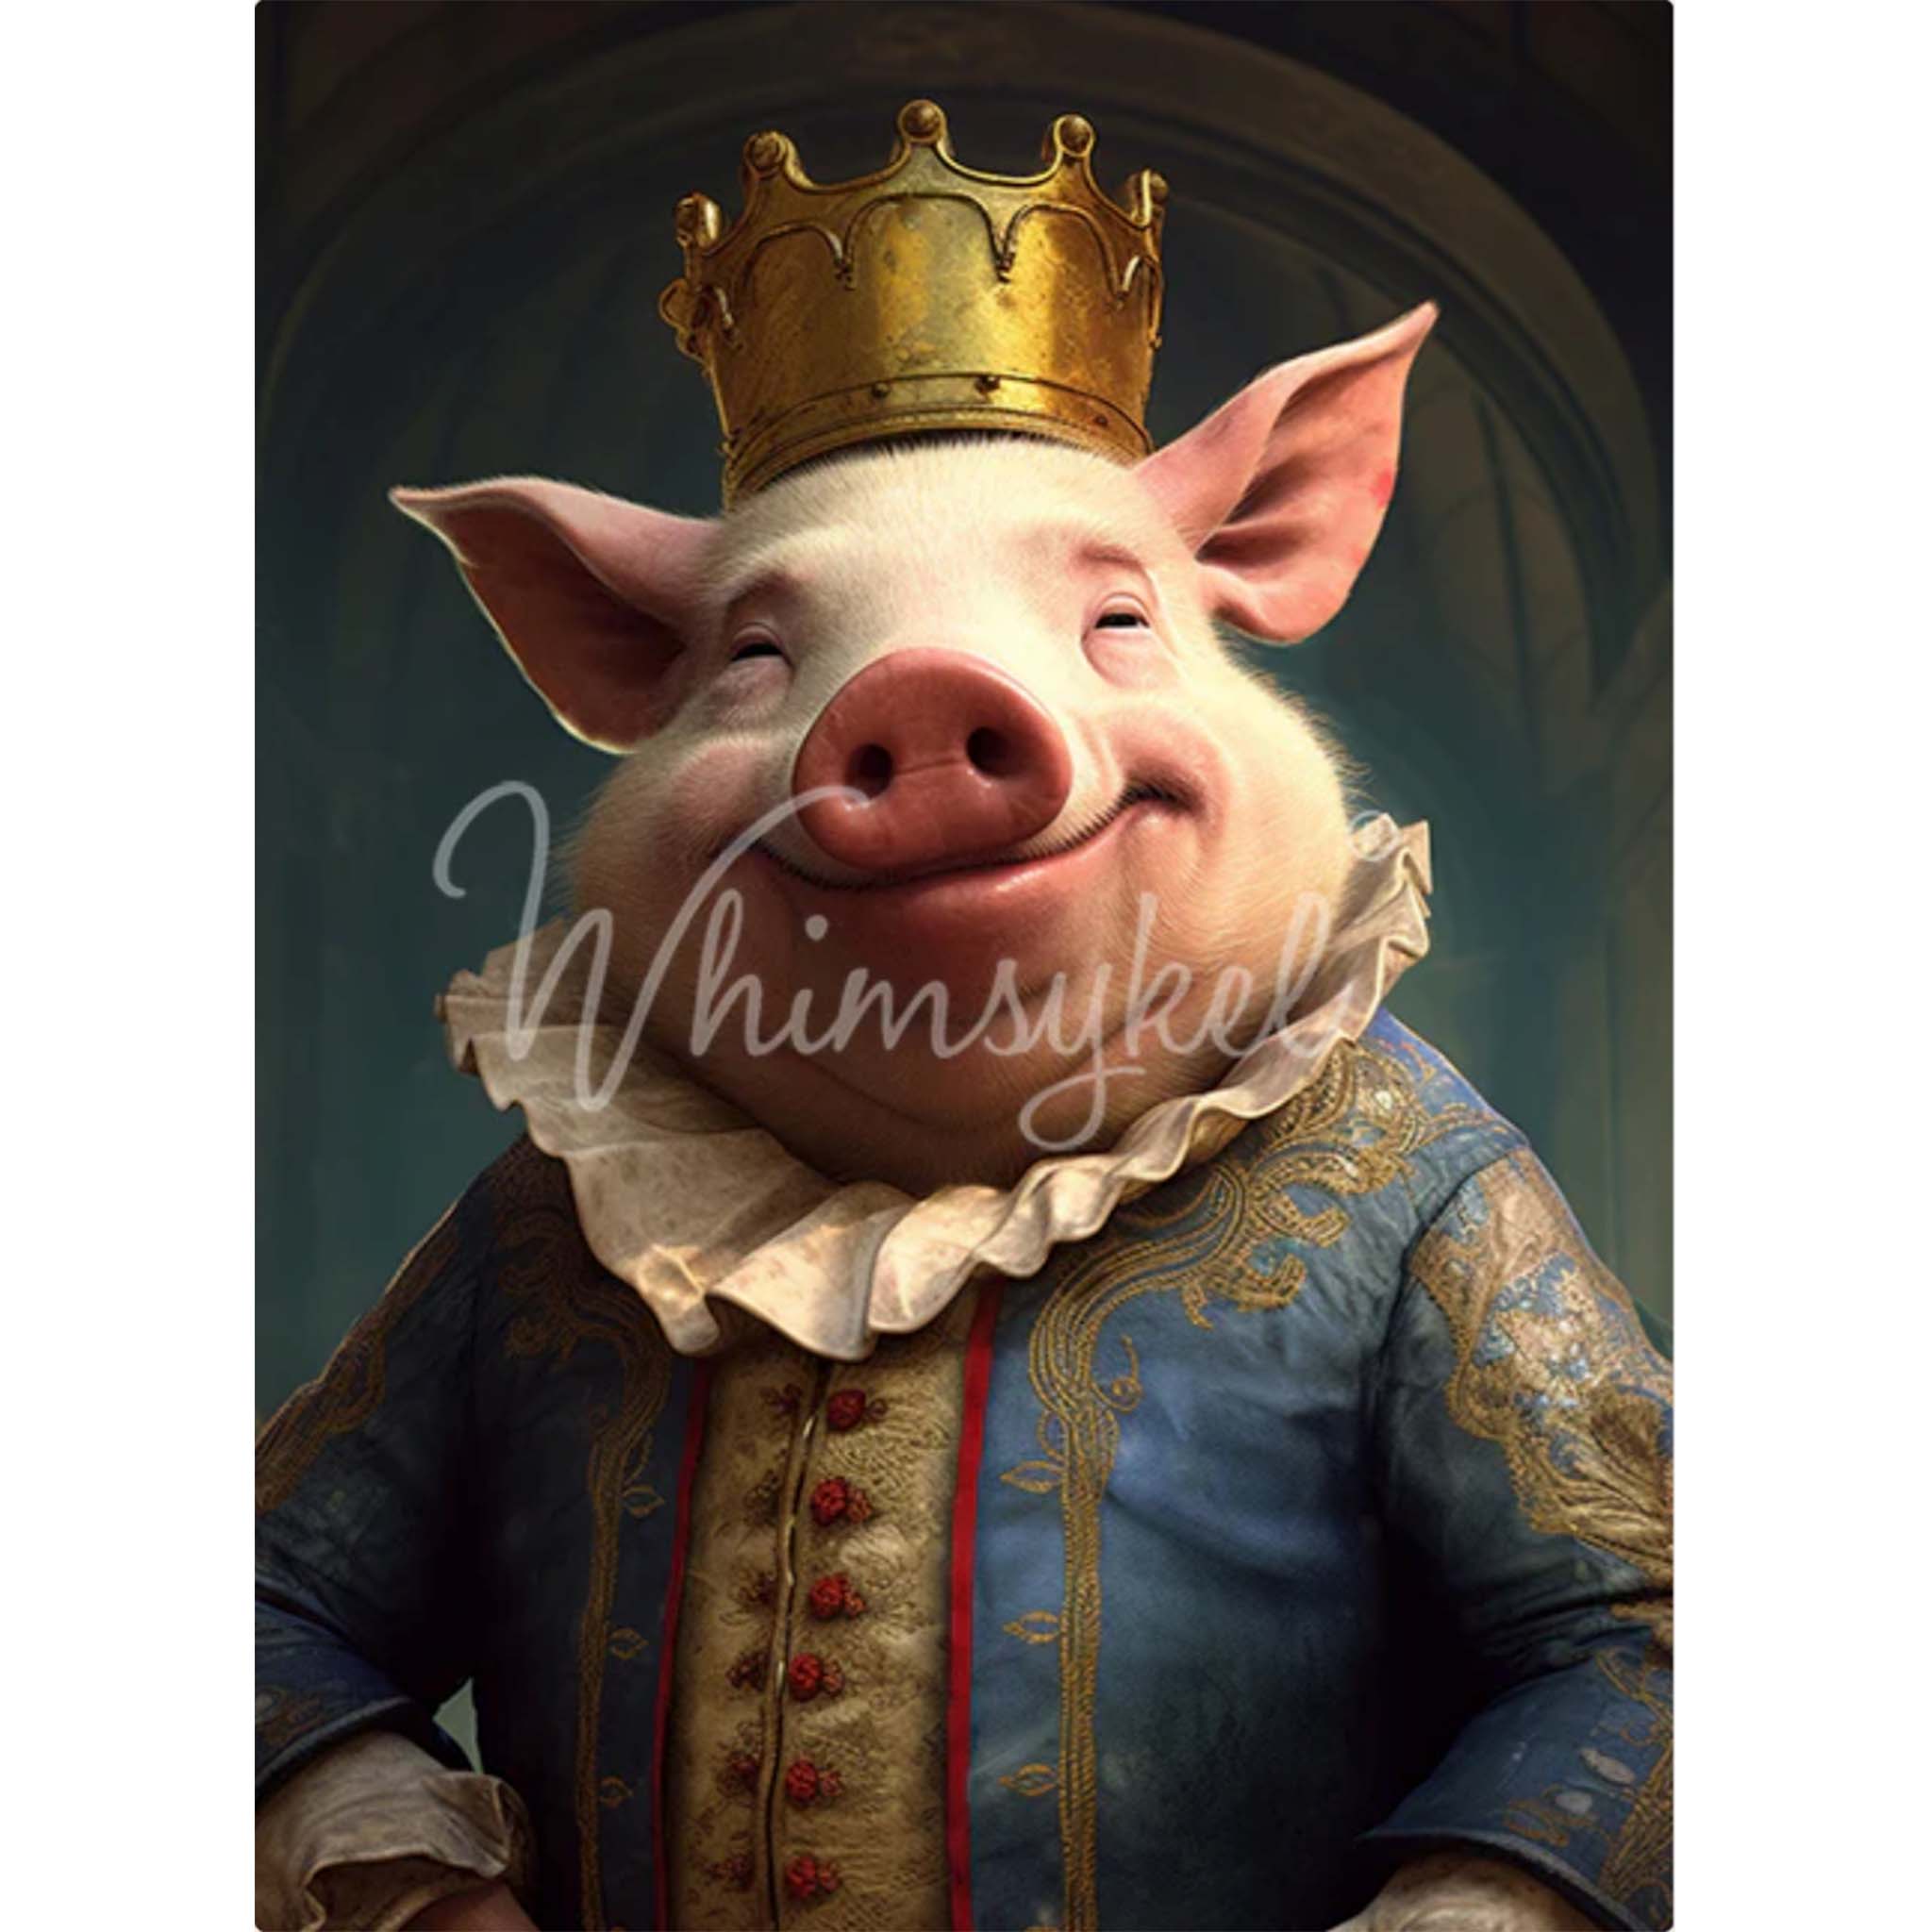 Tissue paper design featuring a grinning pig wearing a golden crown, donning luxurious garments fit for royalty. White borders are on the sides.